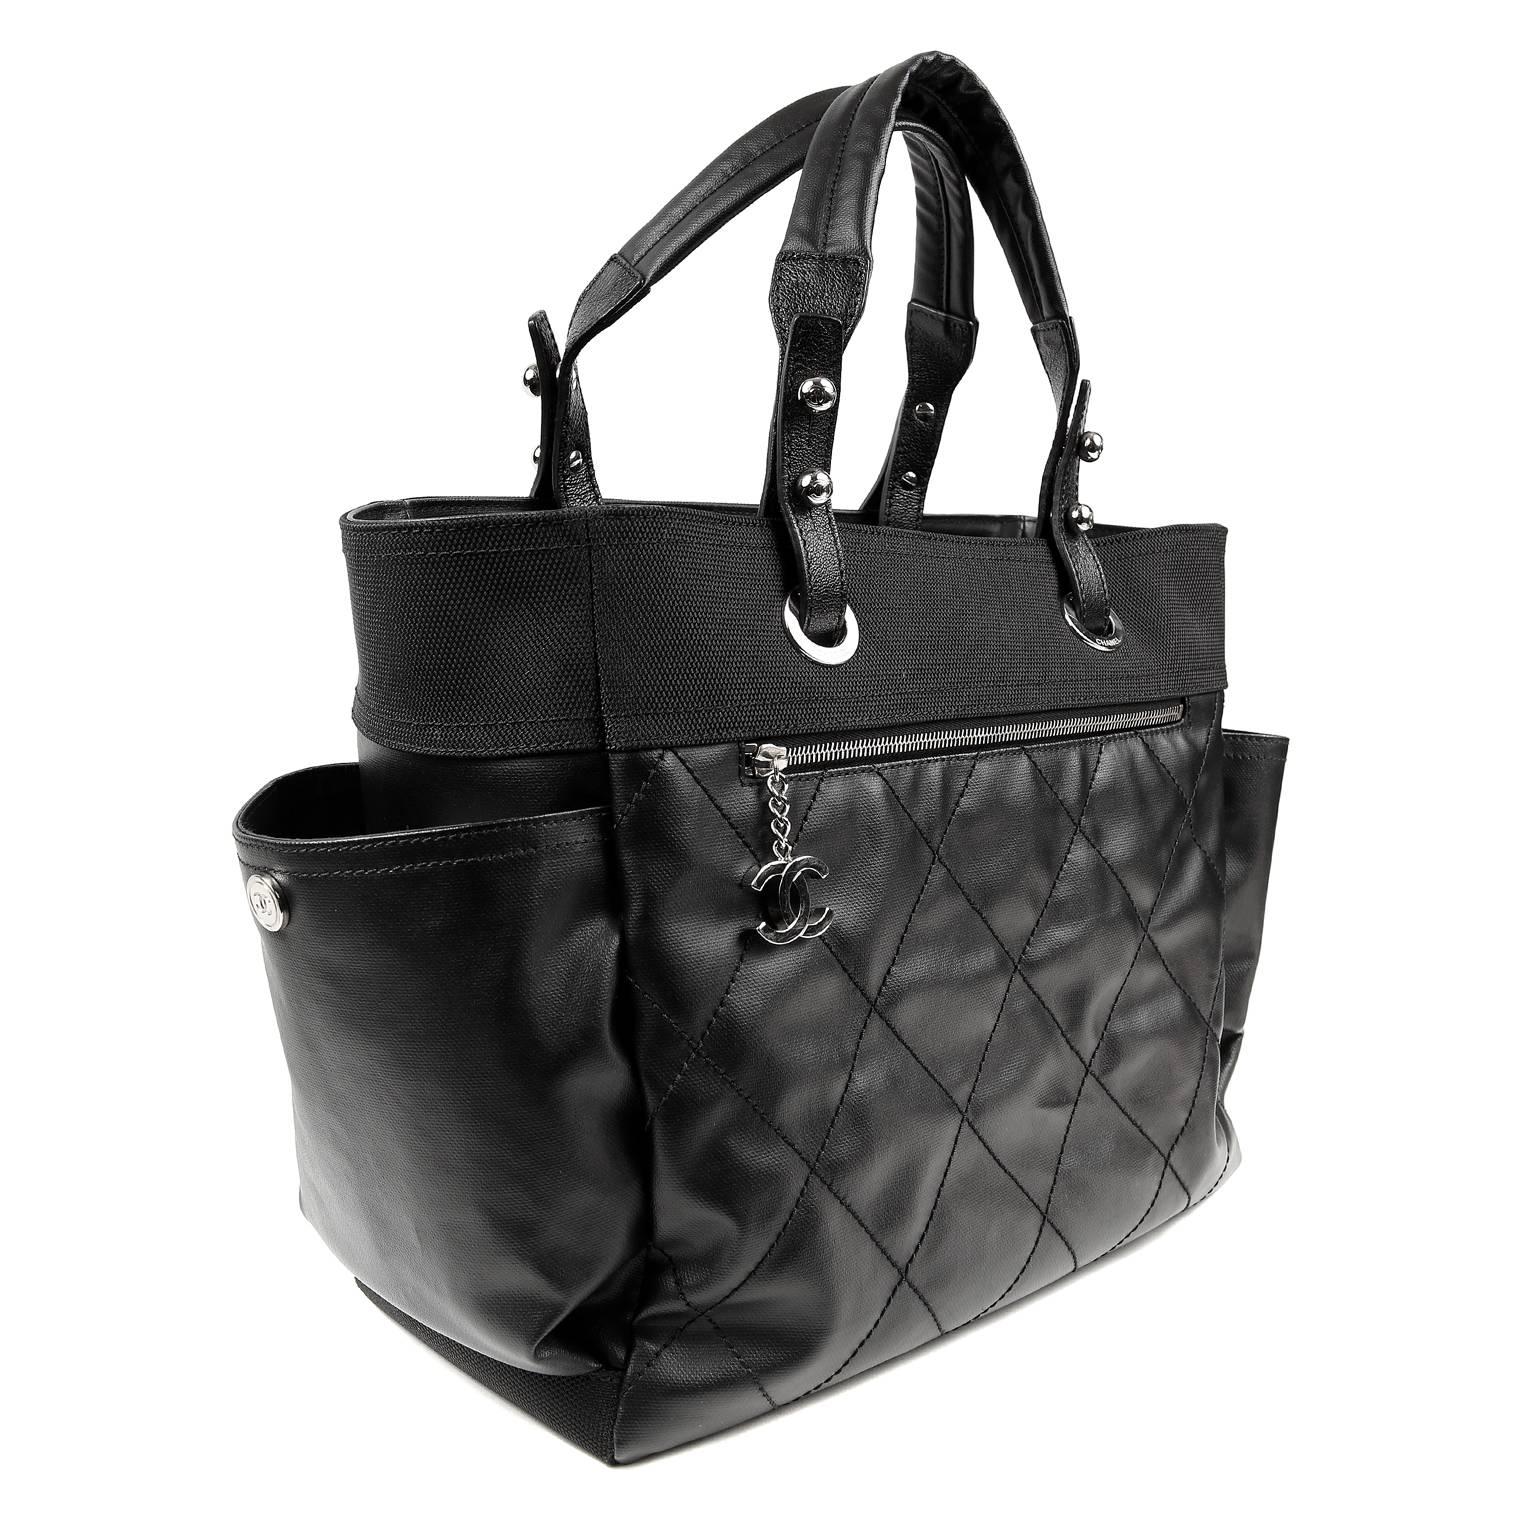 Chanel Black Coated Canvas Biarritz XL Tote- MINT Condition
  Sturdy and durable, it is a great unisex piece with multiple uses.

Weather friendly coated canvas is stitched in signature Chanel diamond pattern.  Front pocket has silver interlocking